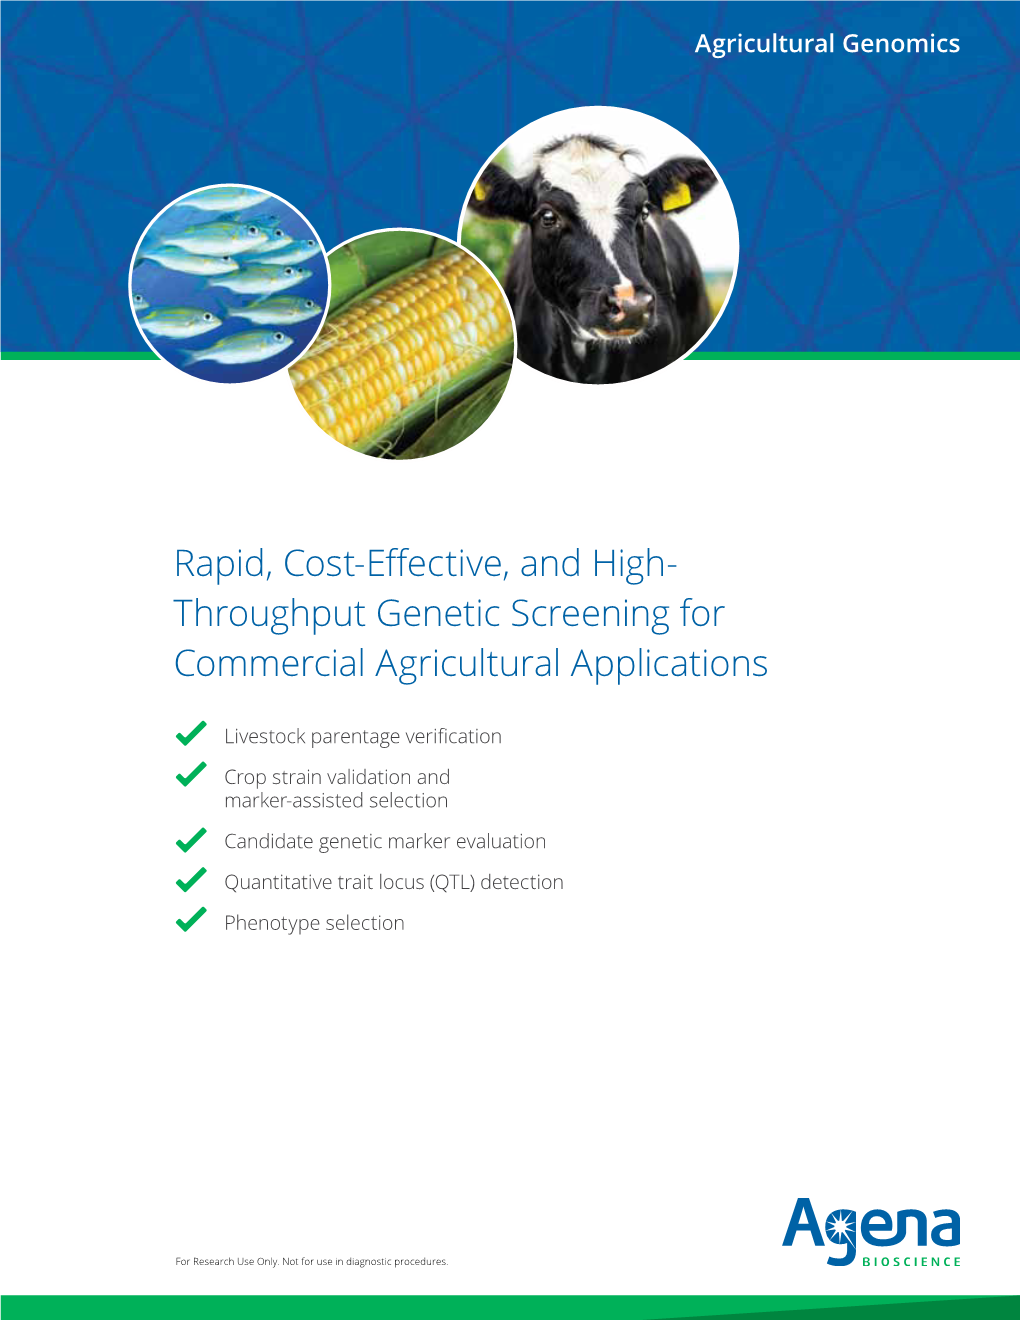 Throughput Genetic Screening for Commercial Agricultural Applications